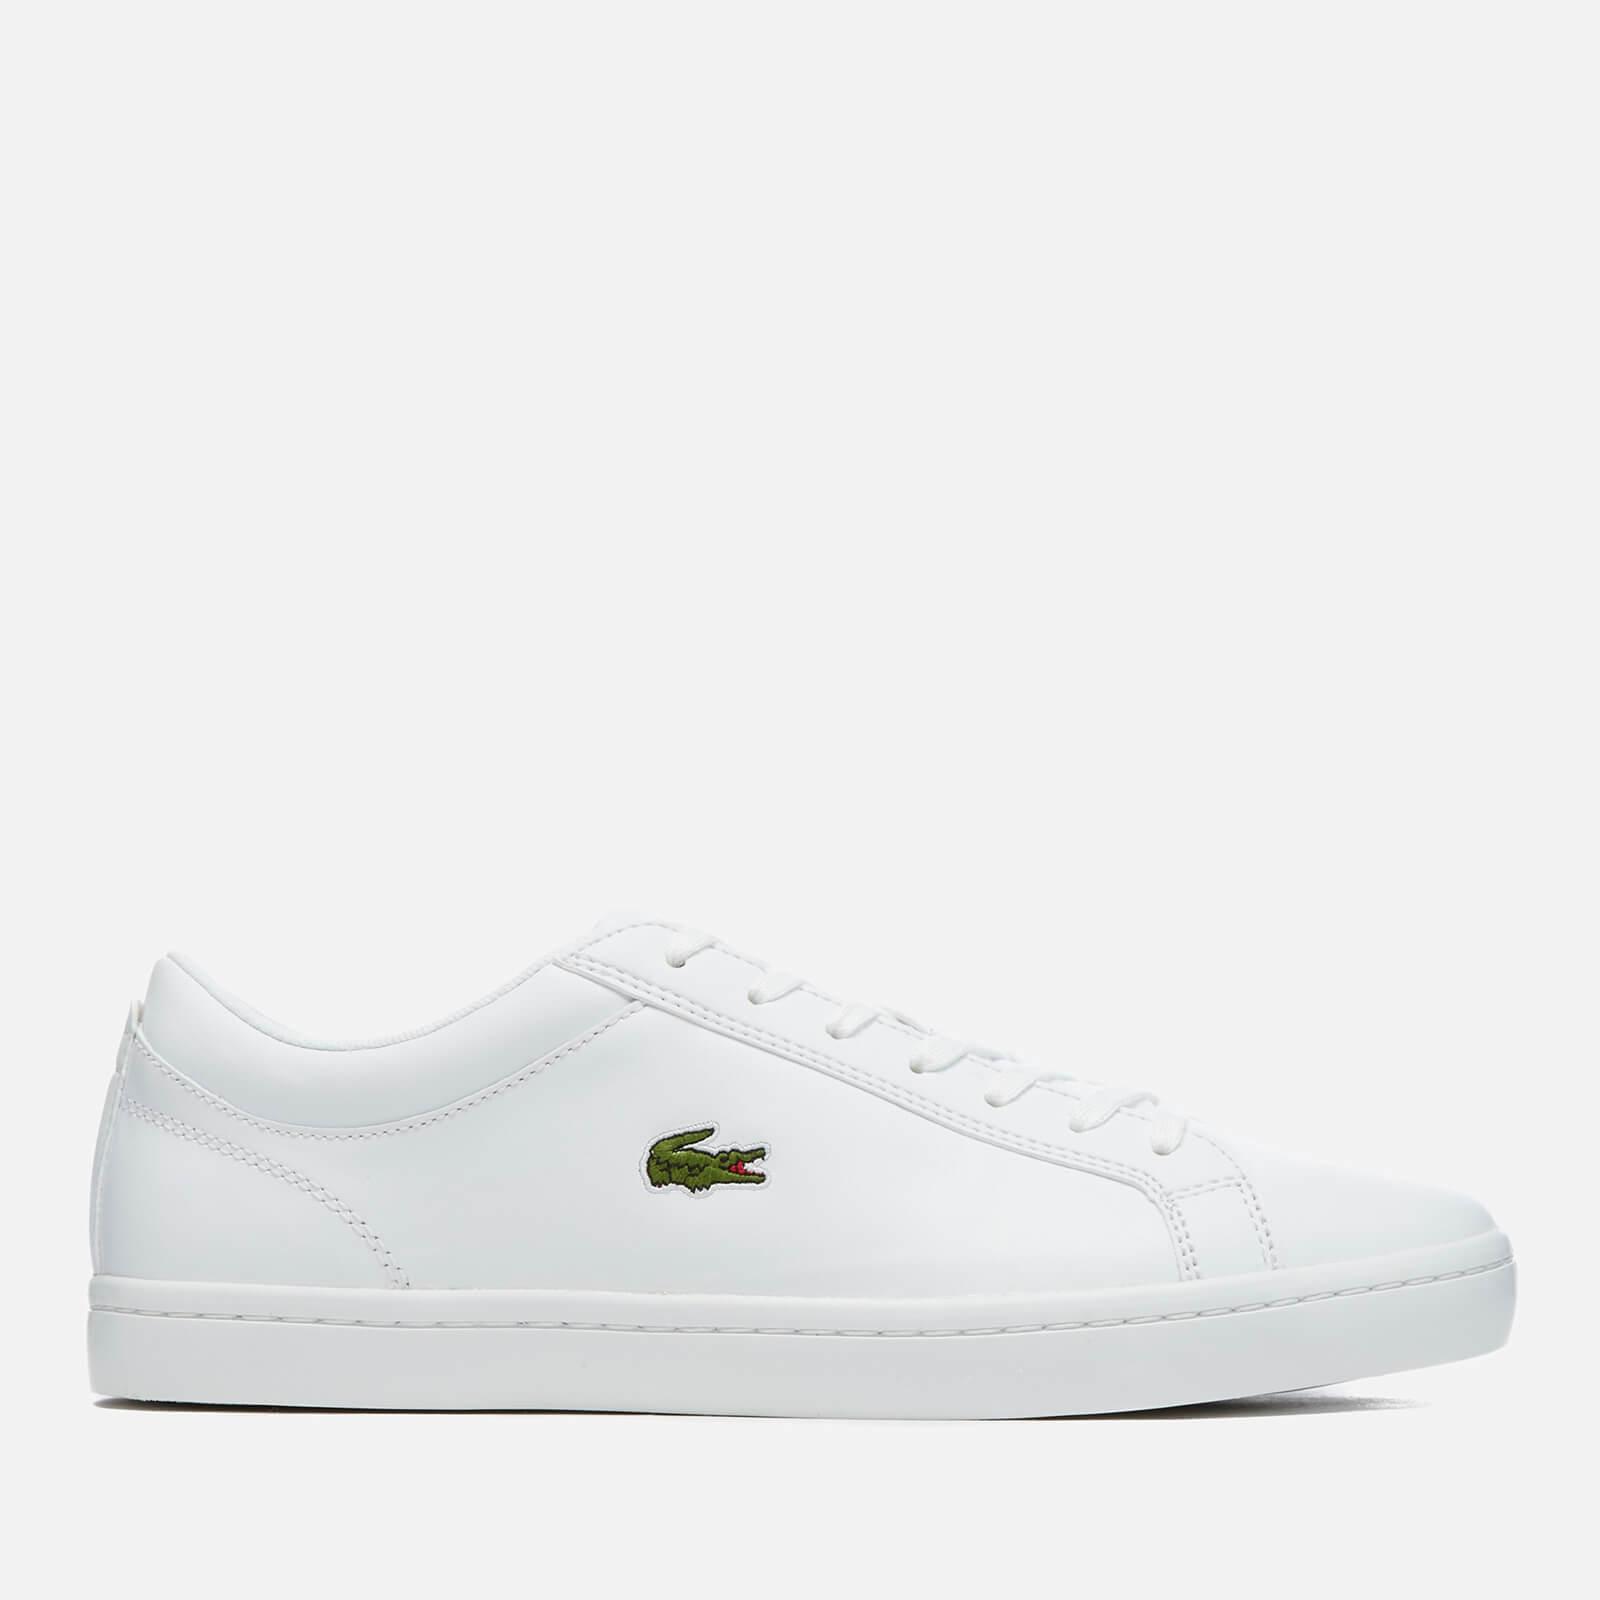 lacoste white trainers